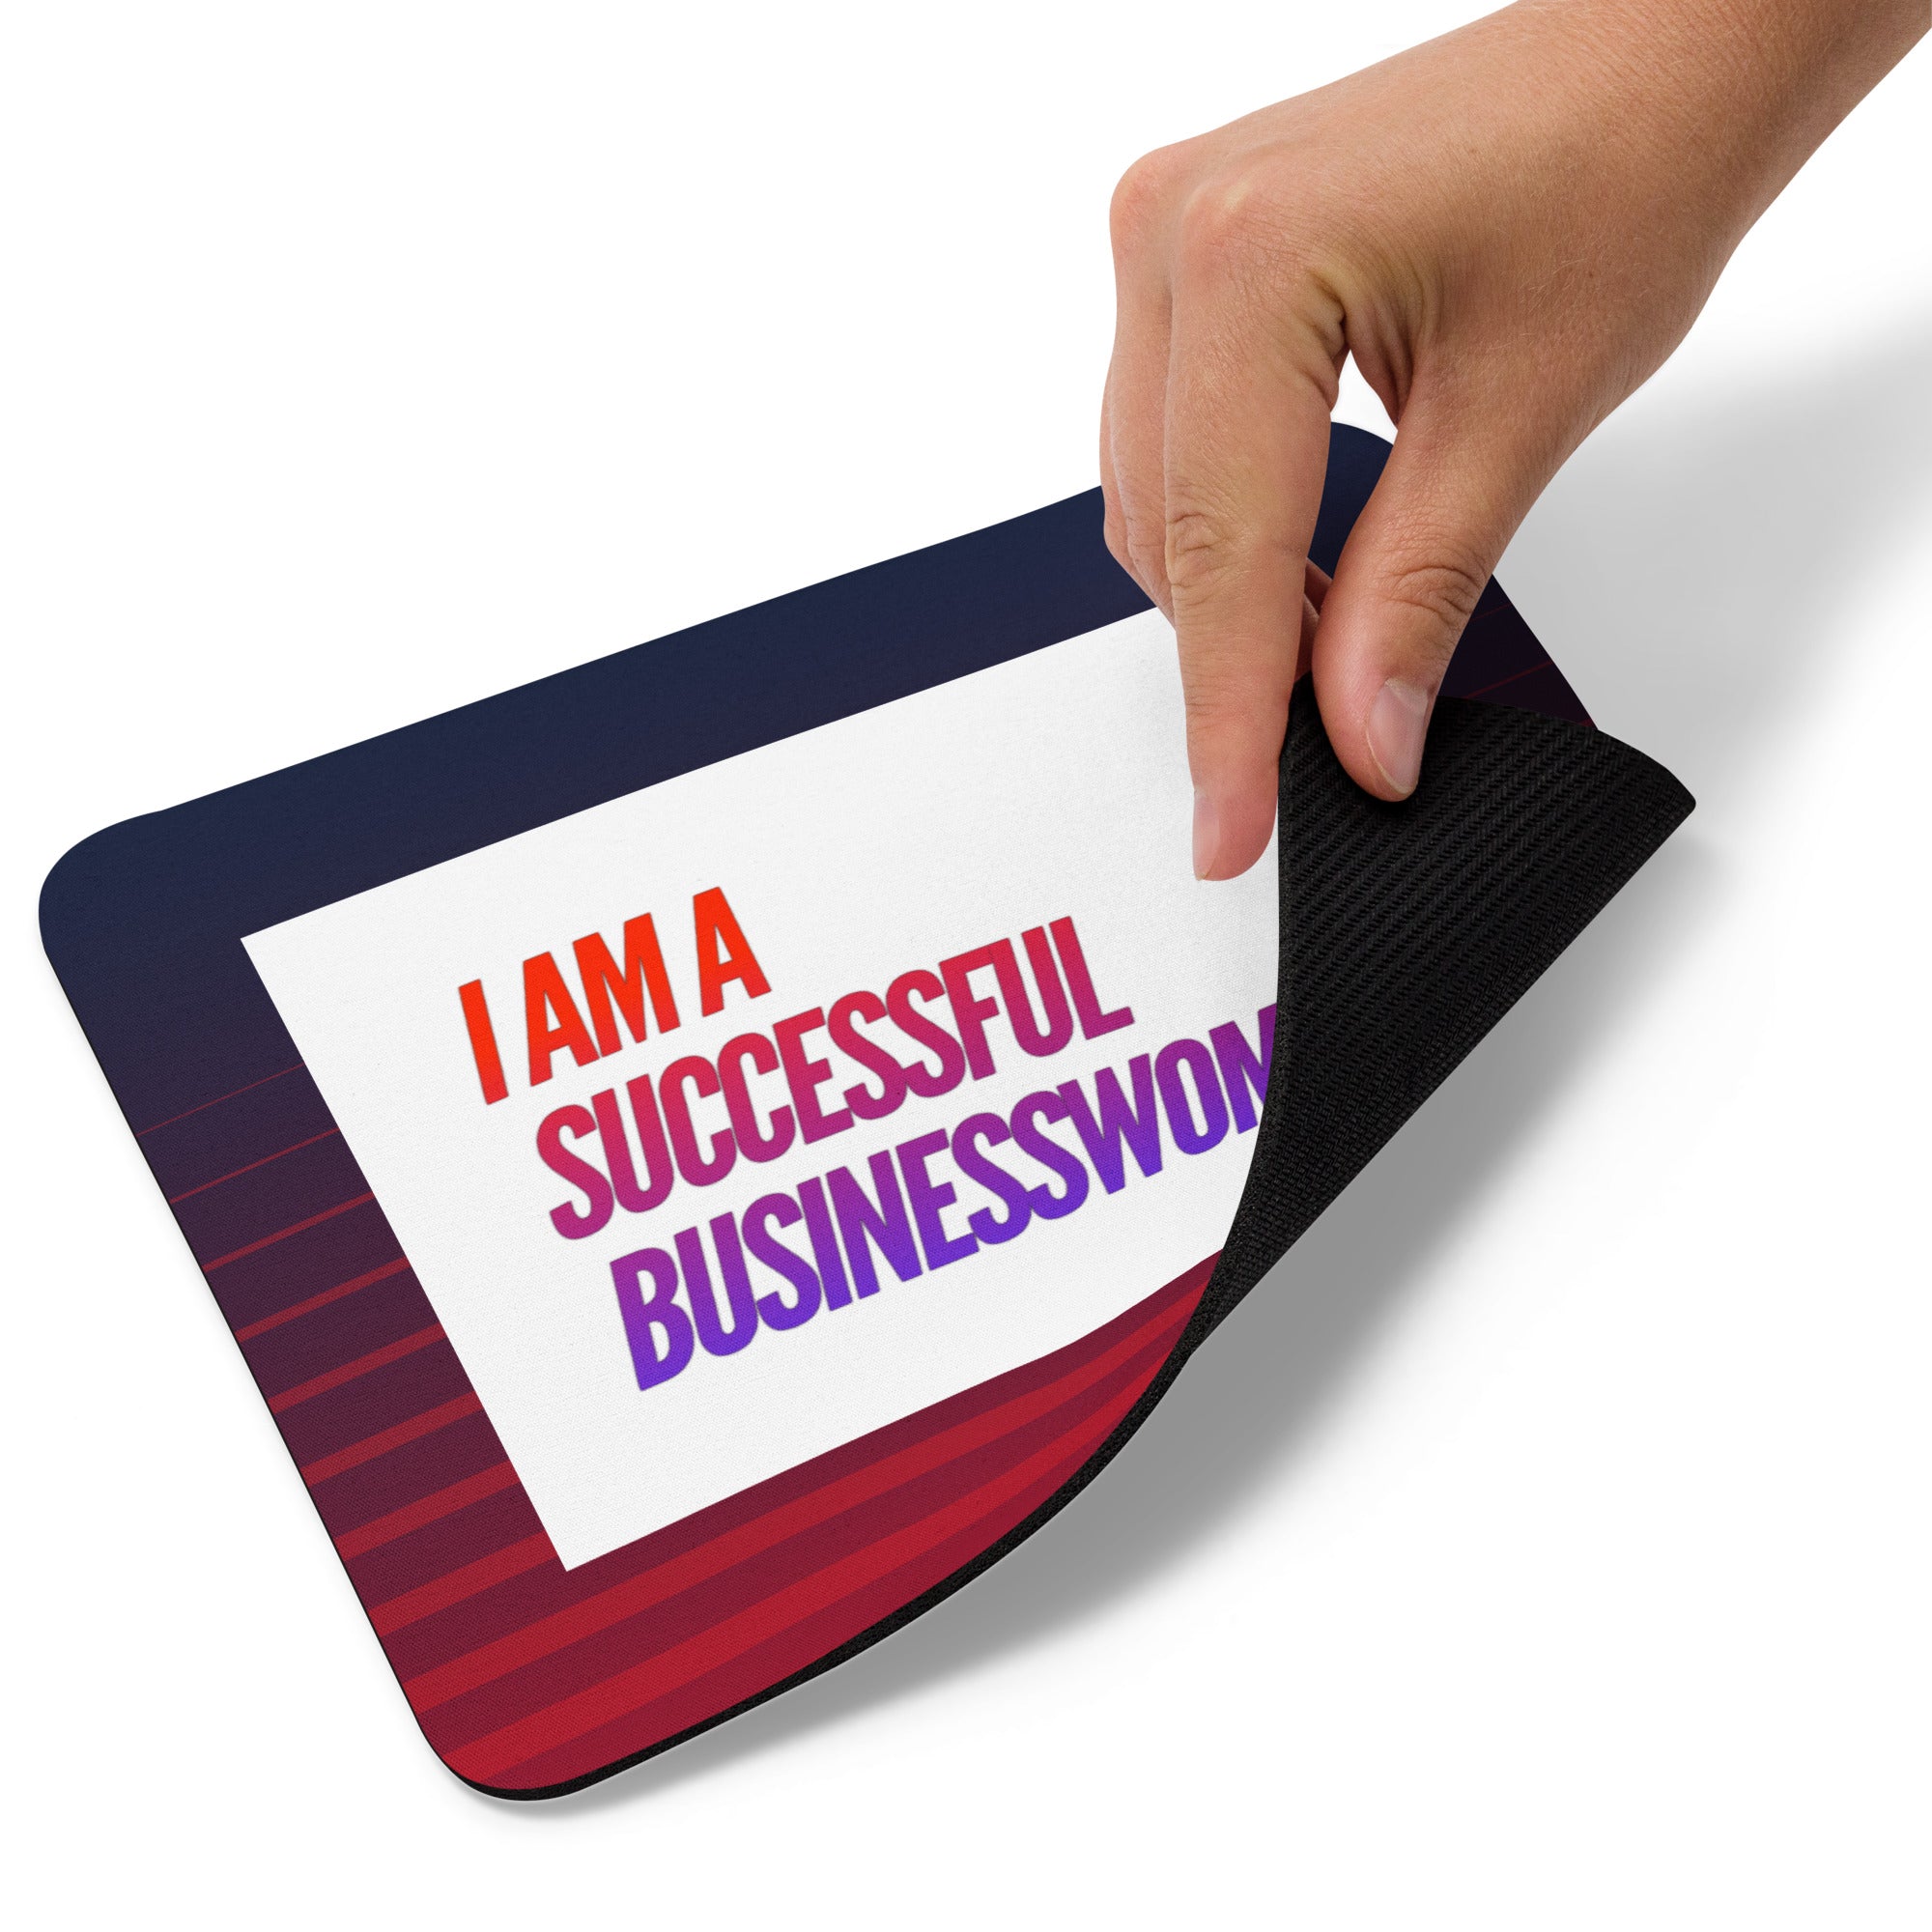 GloWell Designs - Mouse Pad - Affirmation Quote - I Am a Successful Businesswoman - GloWell Designs